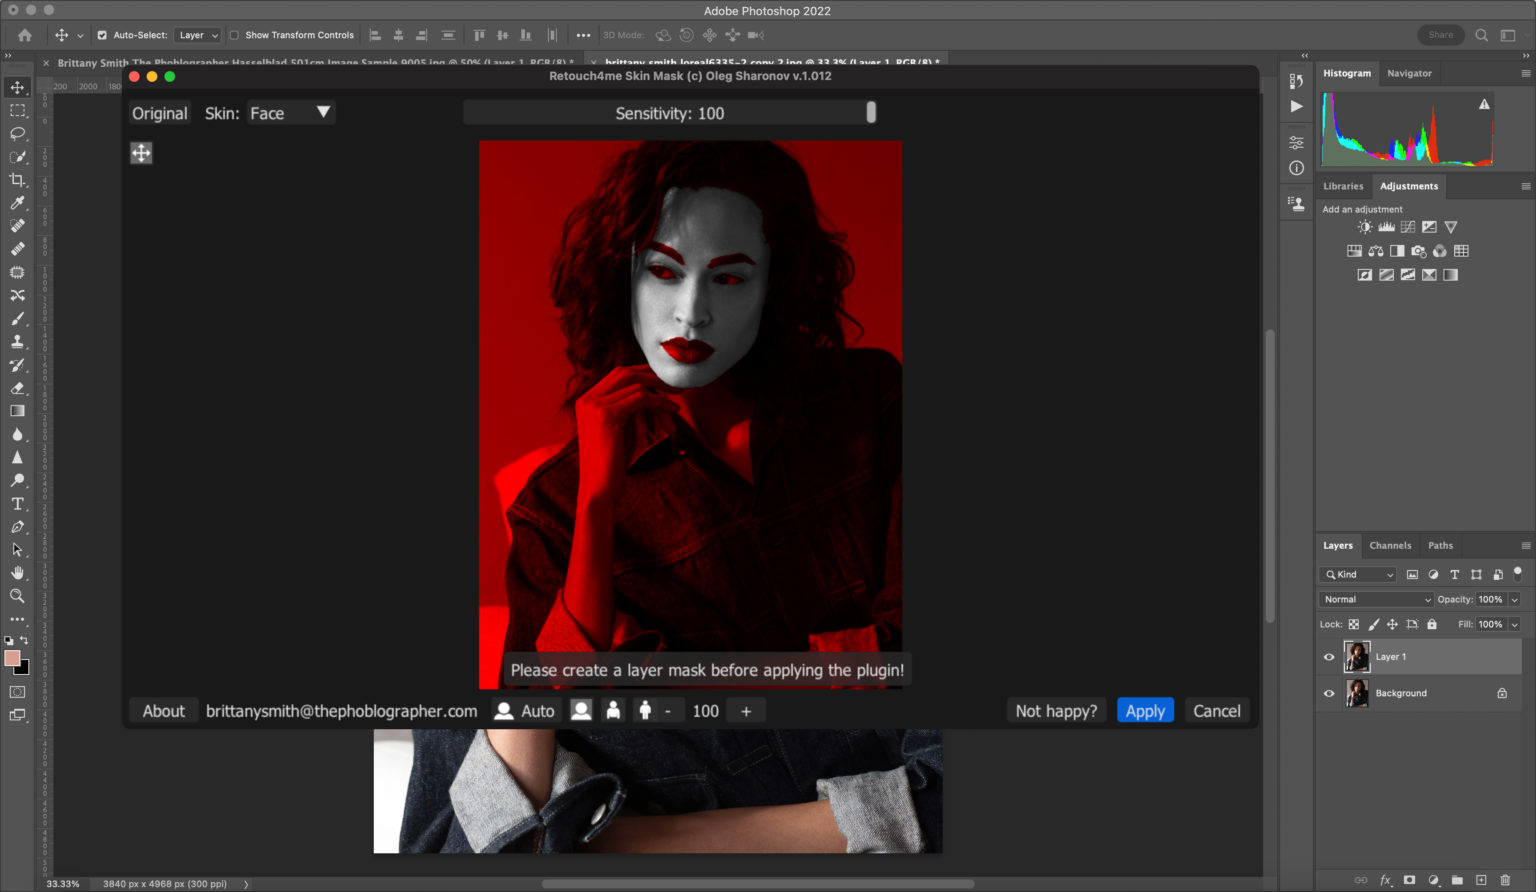 download the last version for windows Retouch4me Skin Mask 1.019